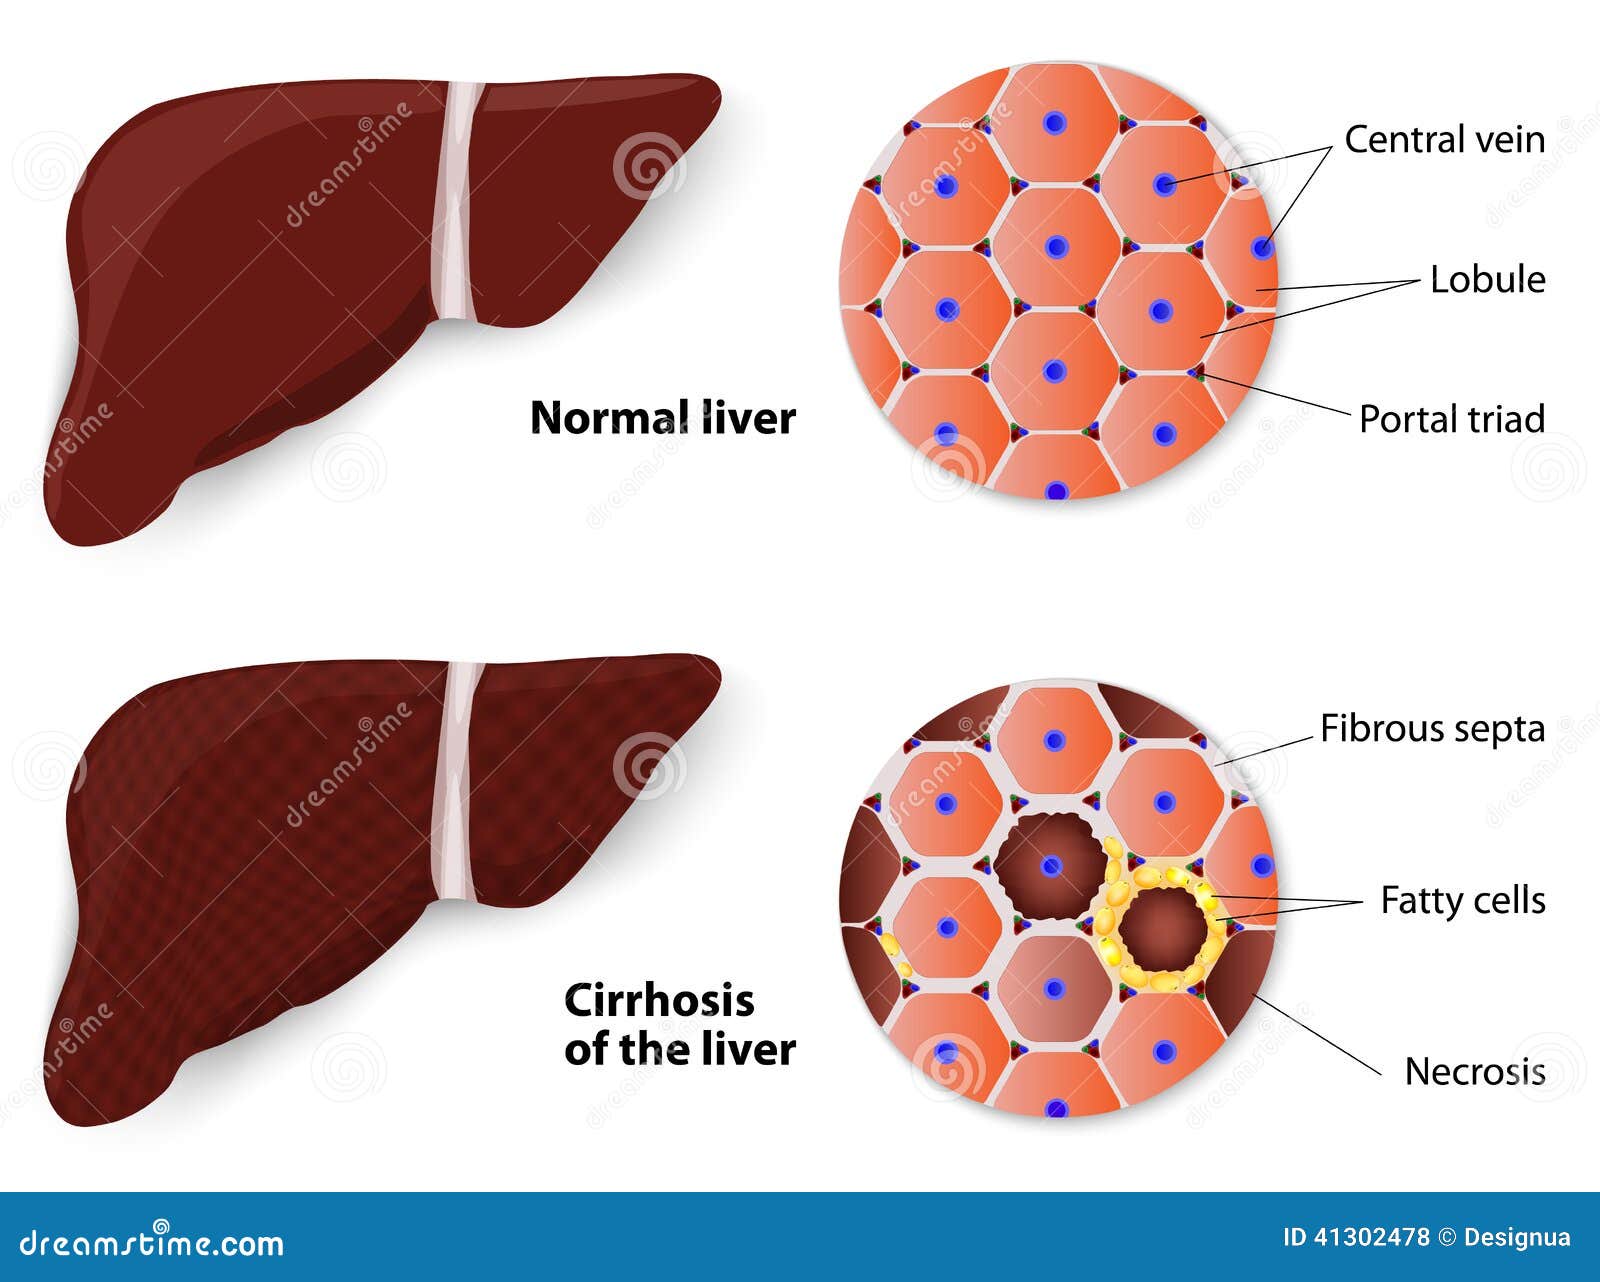 healthy liver and cirrhosis